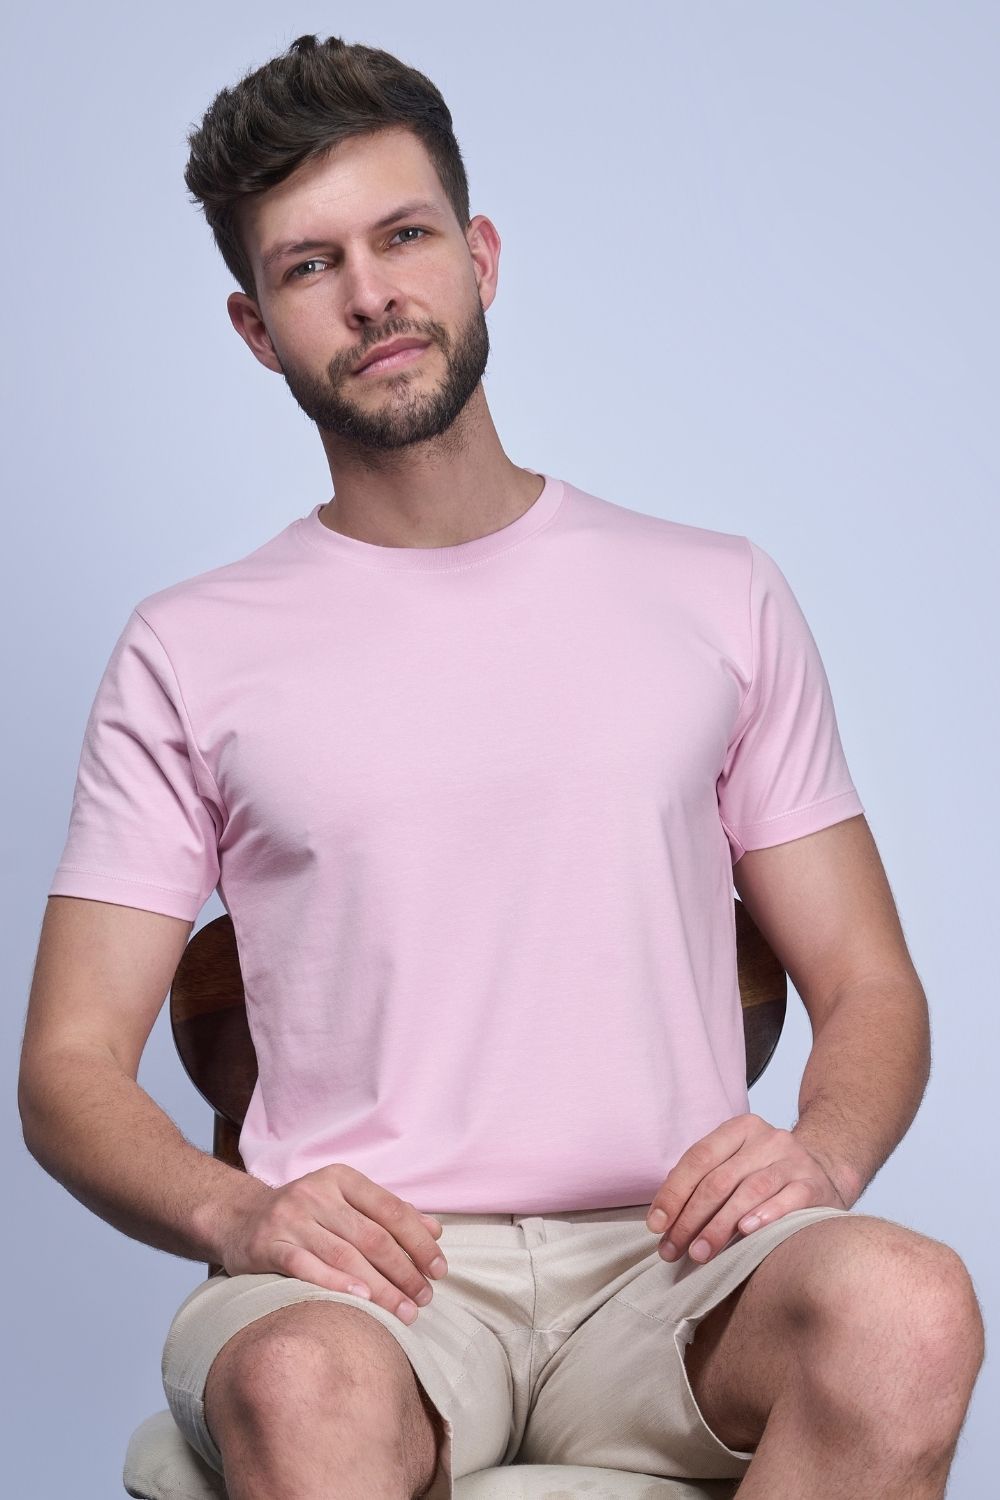 Cotton Stretch T shirt for men in the solid color lilac shade with half sleeves and round neck.